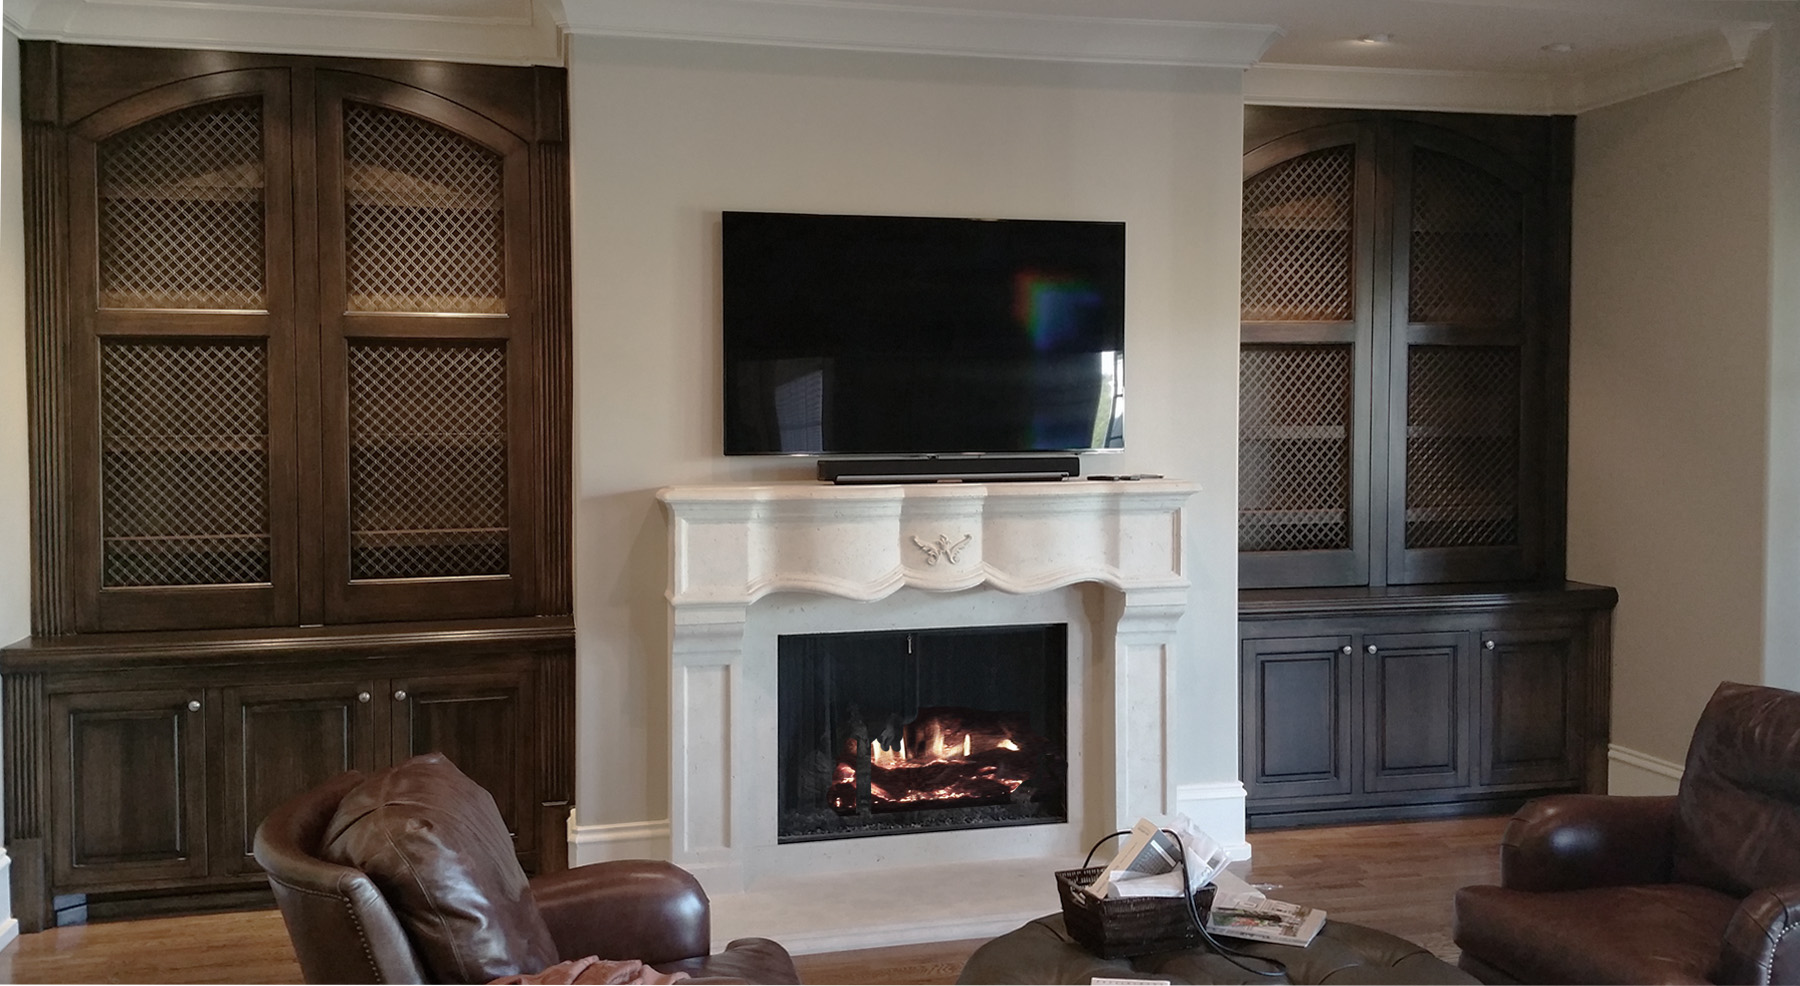 Wood grained built-in cabinets and painted feature wall and glazed hearth.